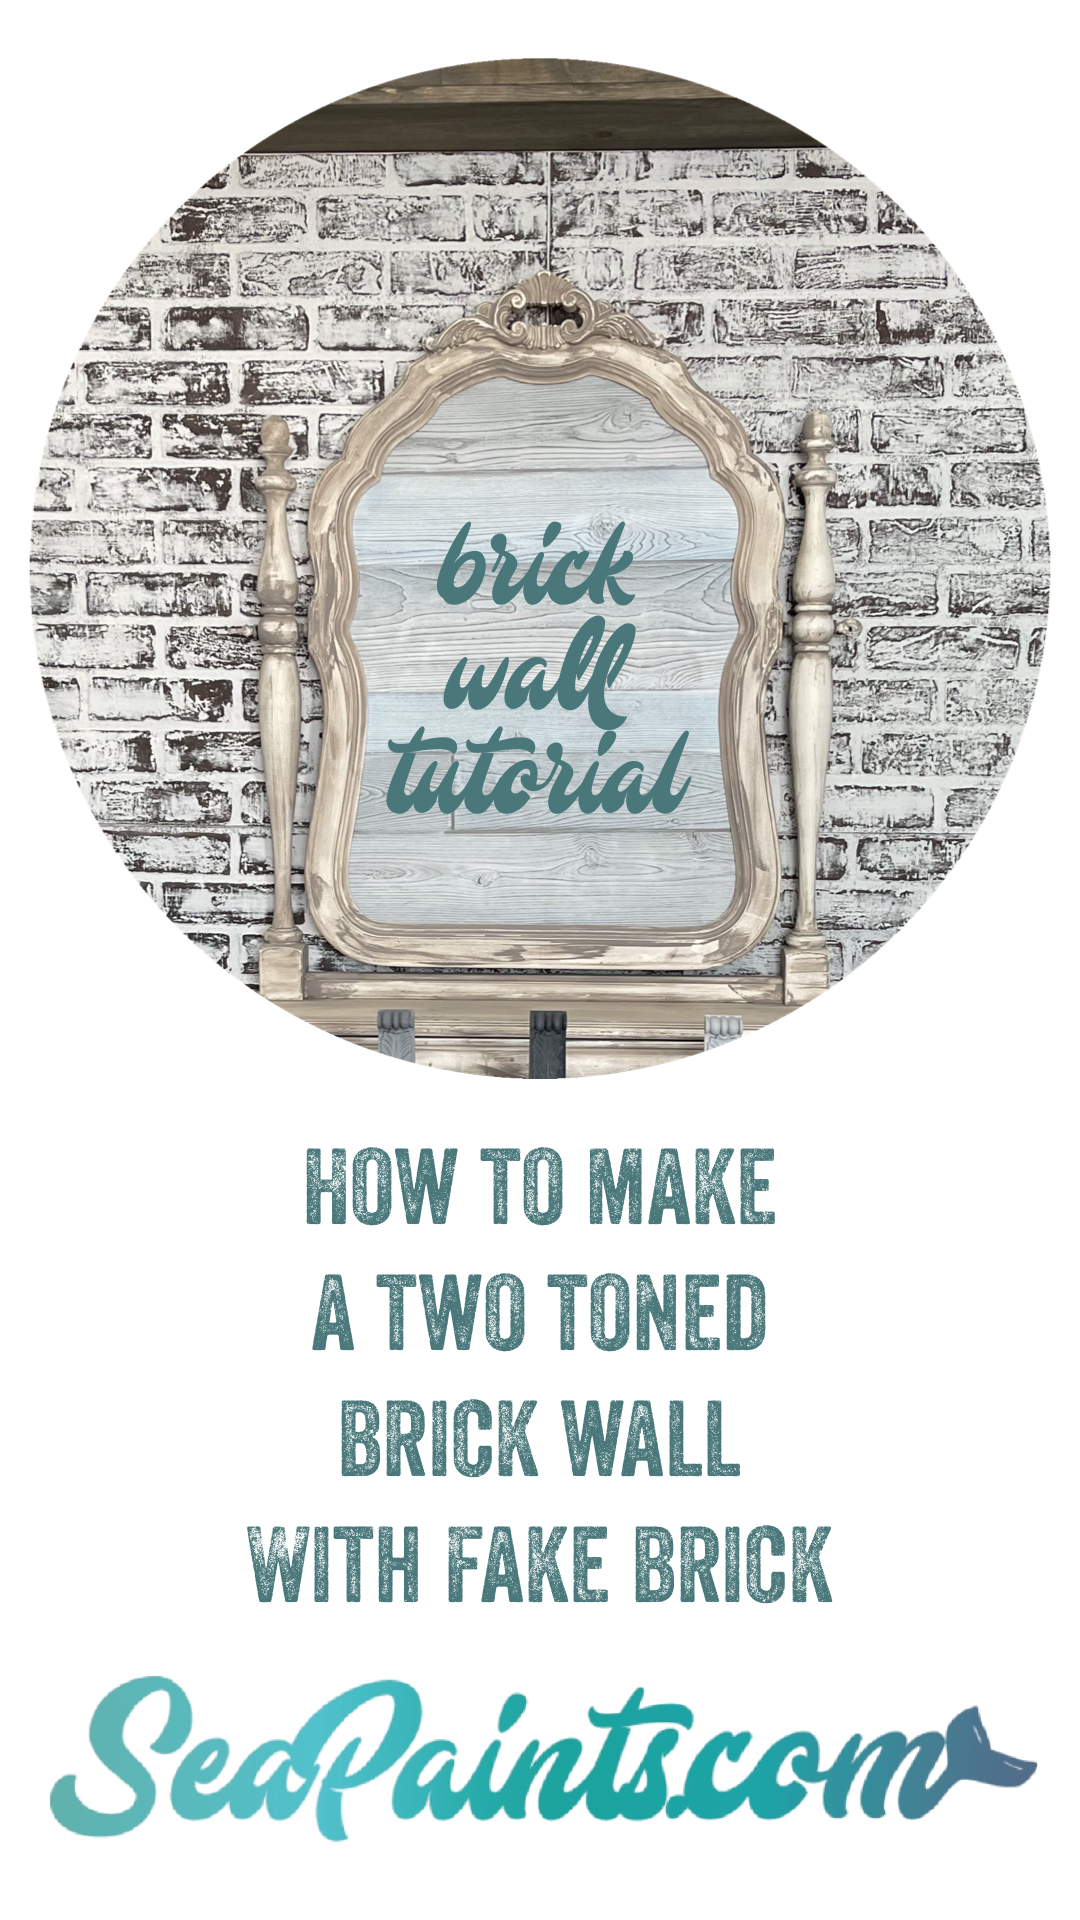 How To Make Two Toned Brick Wall